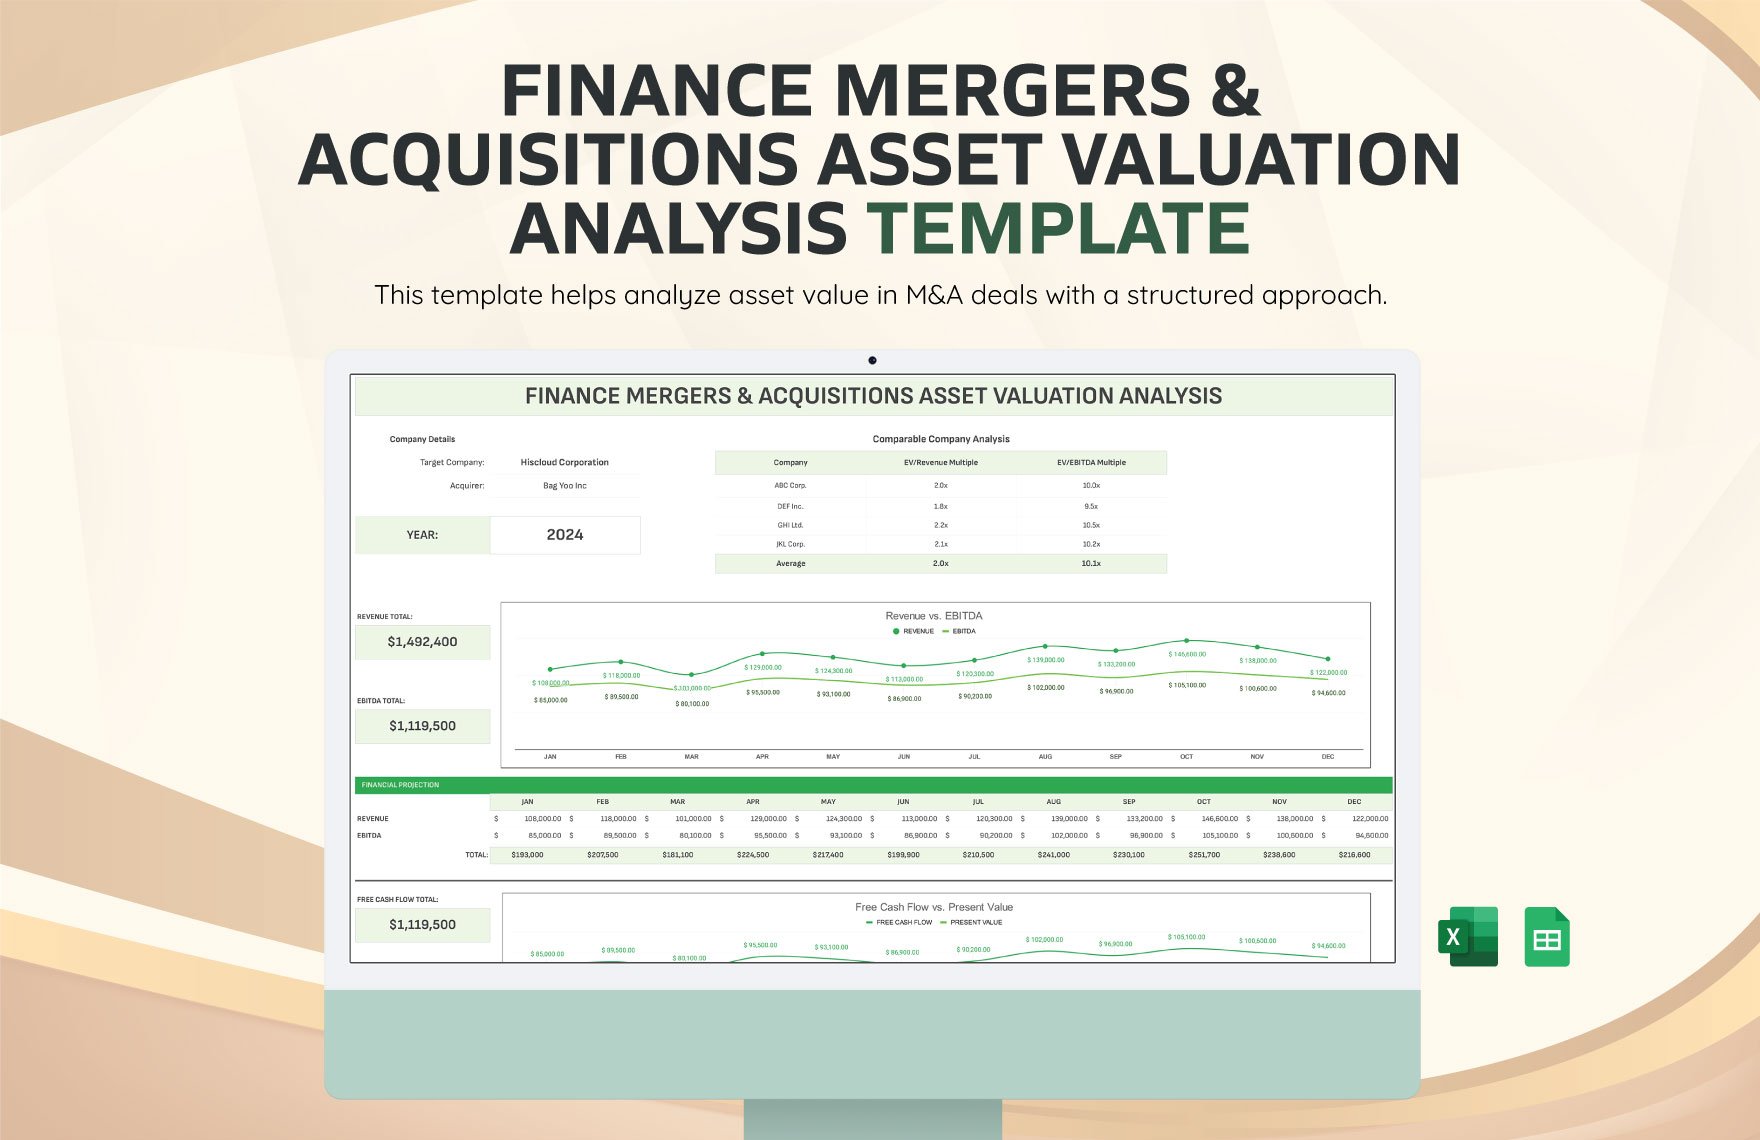 Finance Mergers & Acquisitions Asset Valuation Analysis Template